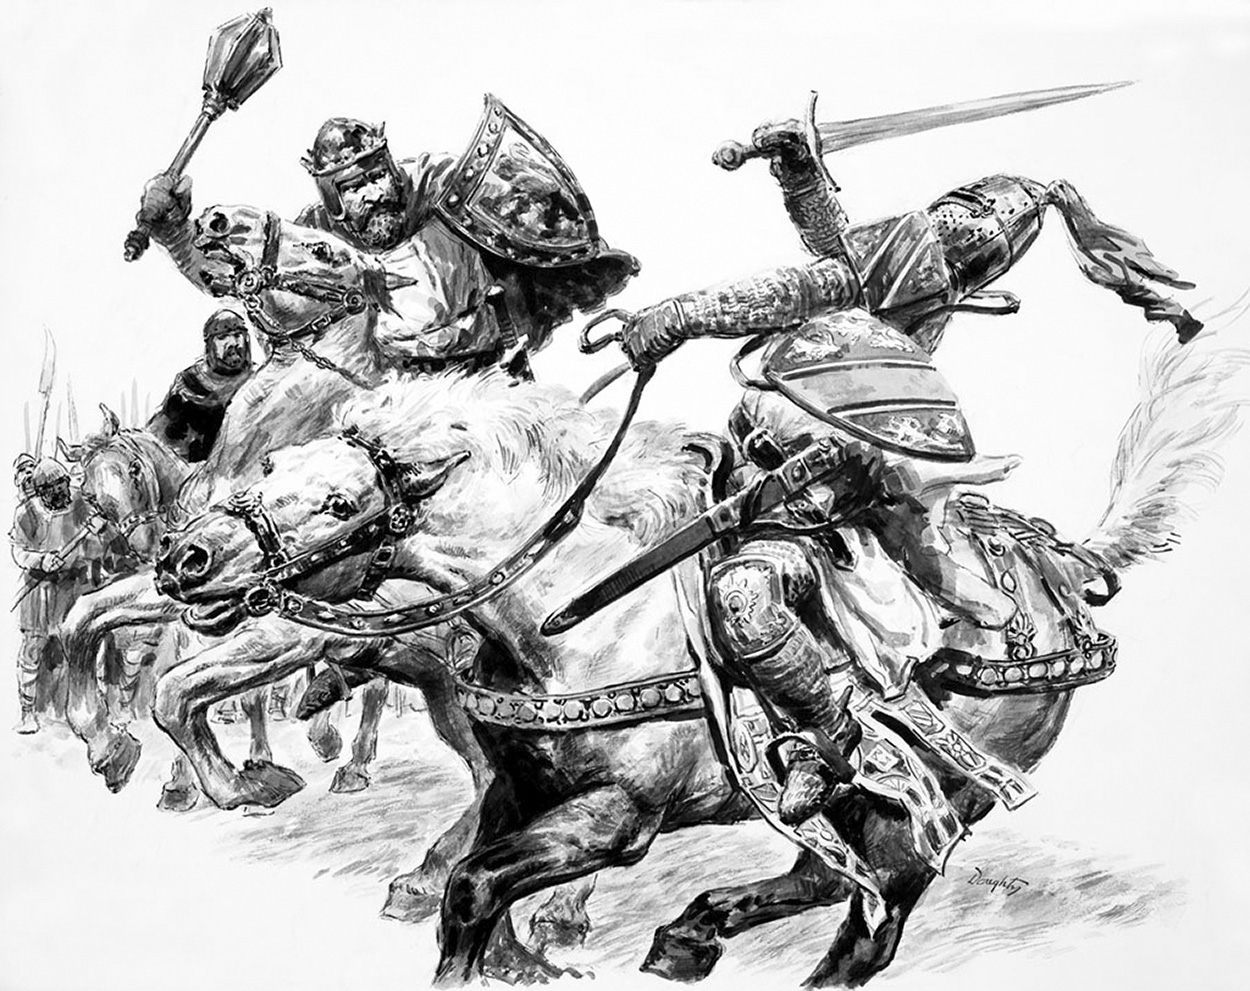 Mighty Monarchs: The King Without a Kingdom (Robert the Bruce) (Original) (Signed) art by British History (Doughty) at The Illustration Art Gallery